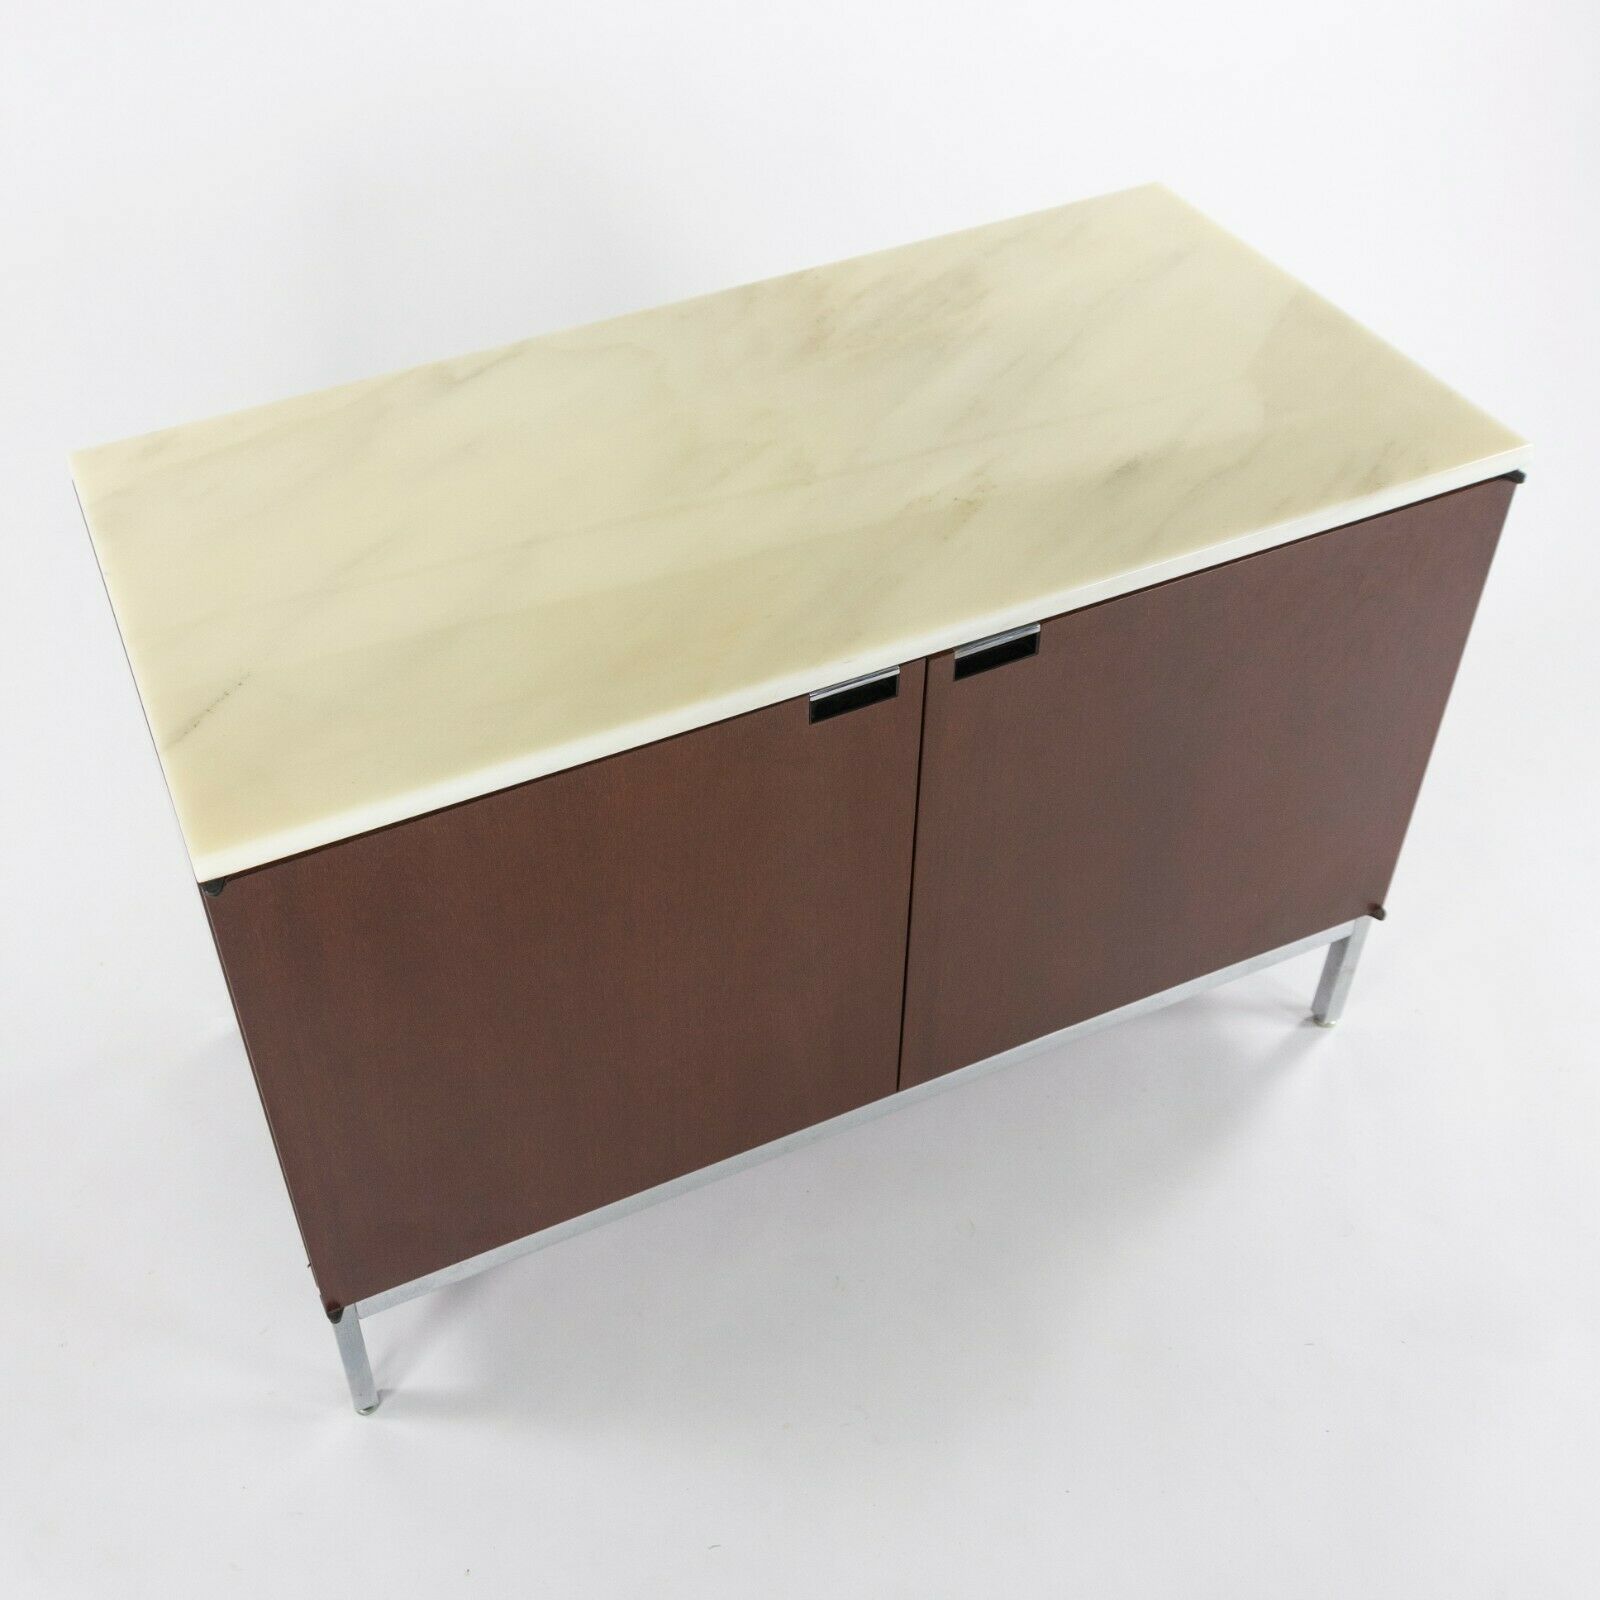 SOLD 1970s Florence Knoll for Knoll International 2 Door Credenza / Cabinet with White Marble Top